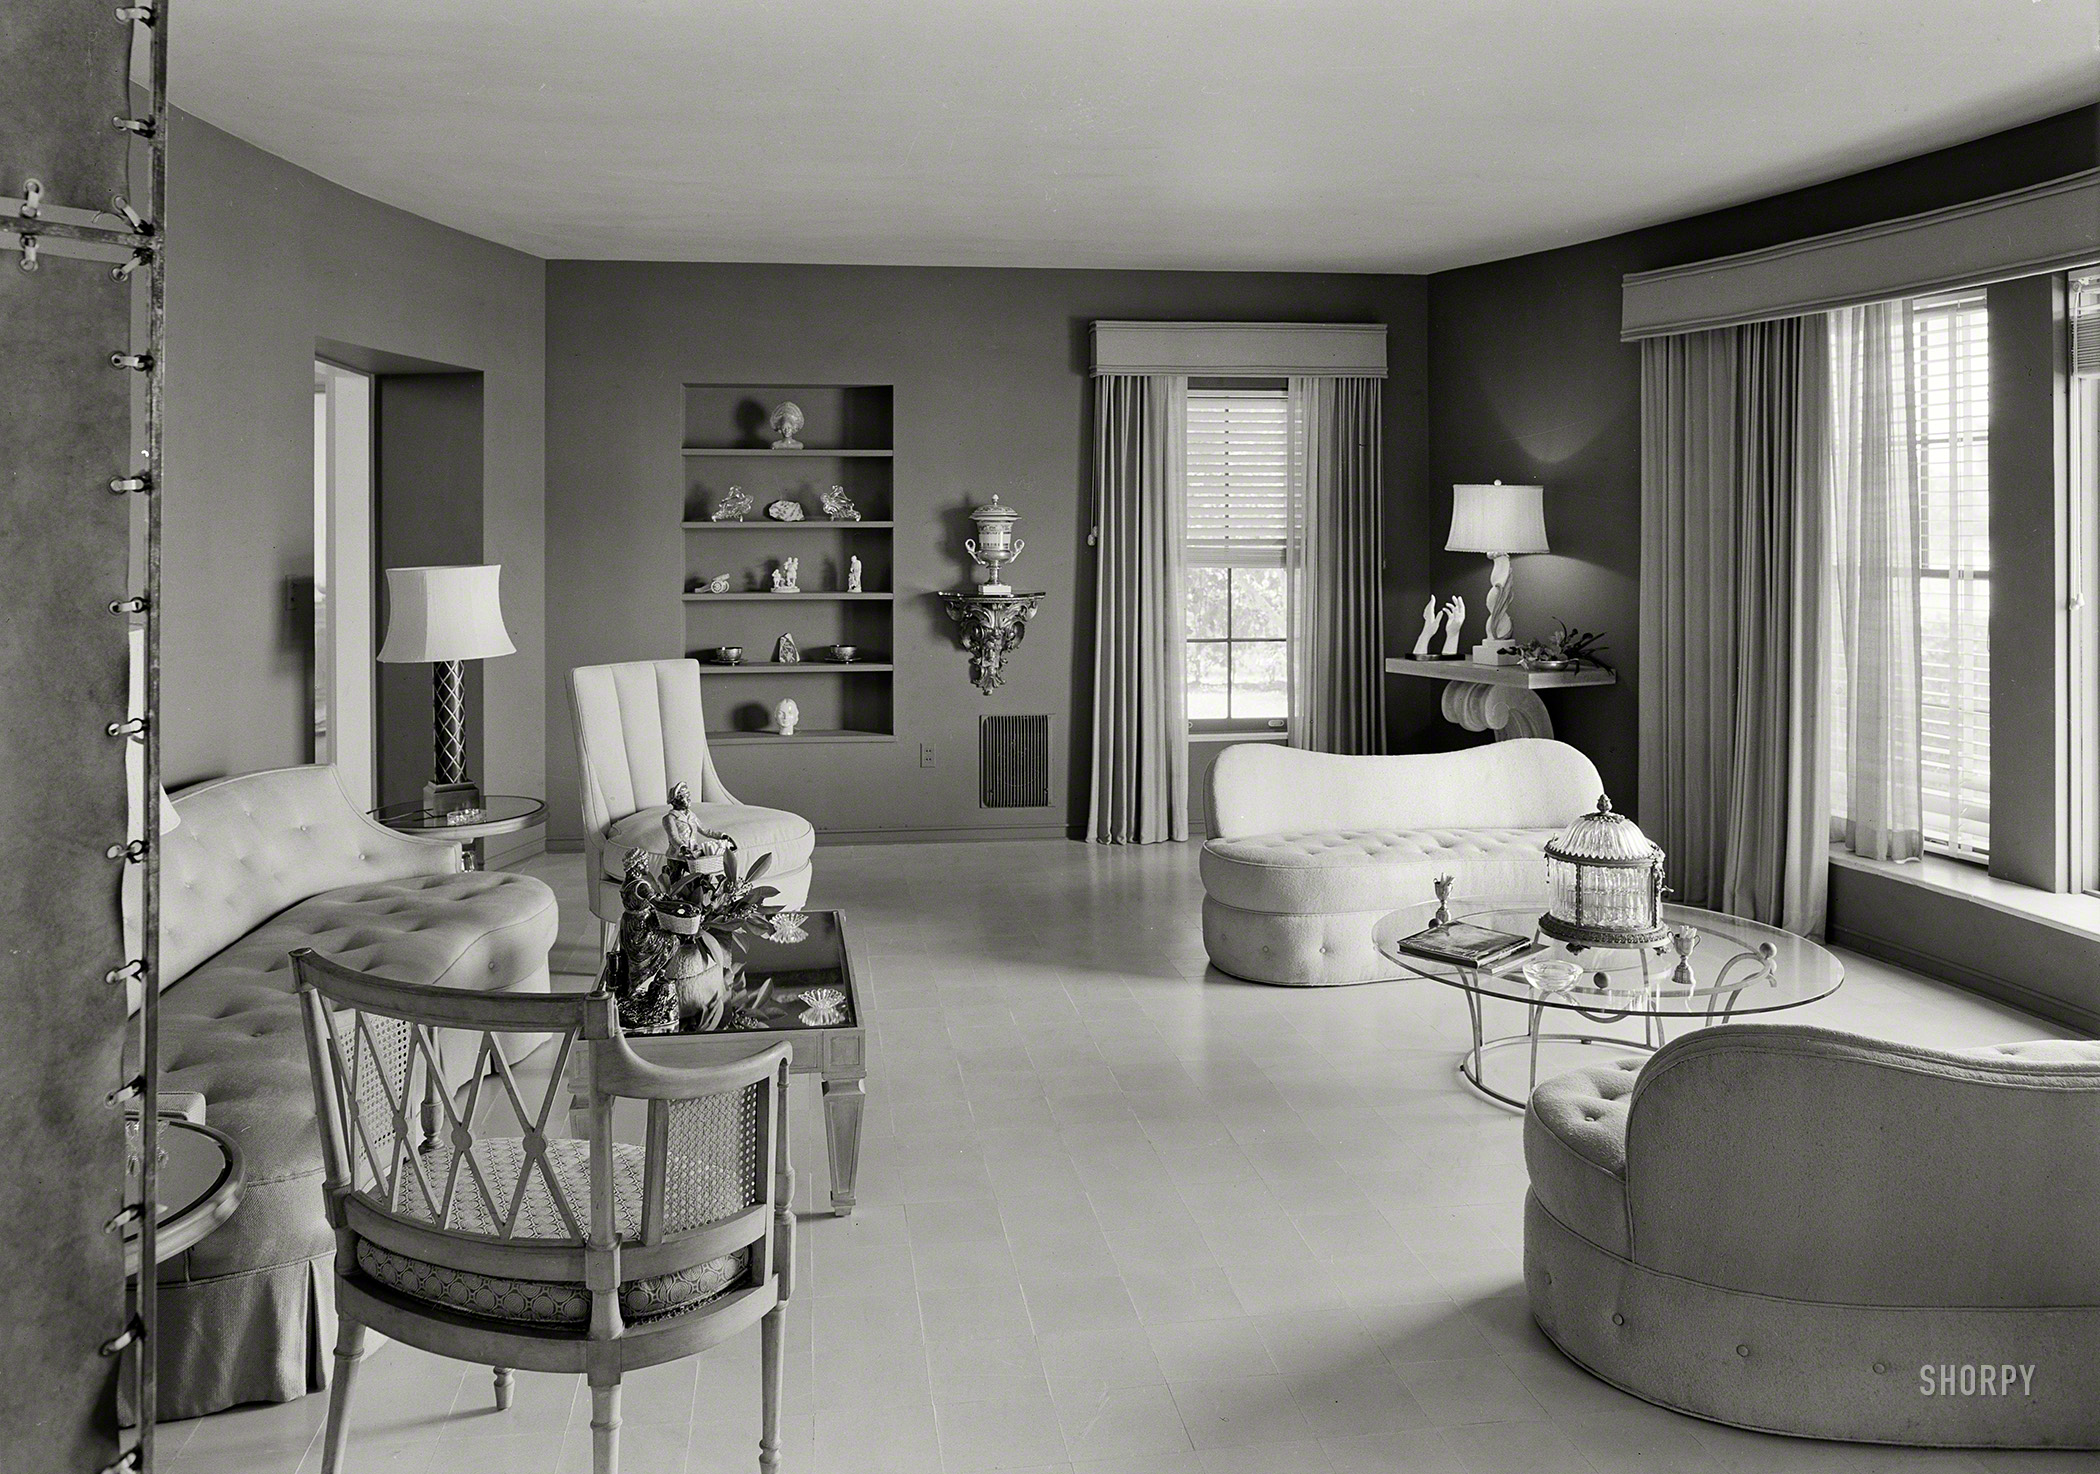 January 21, 1940. "Stephen A. Lynch Jr. residence, No. 3 Sunset Island, Miami Beach, Florida. Living room, general view. William Pahlmann, decorator; Robert Law Weed, architect." Gottscho-Schleisner photo. View full size.